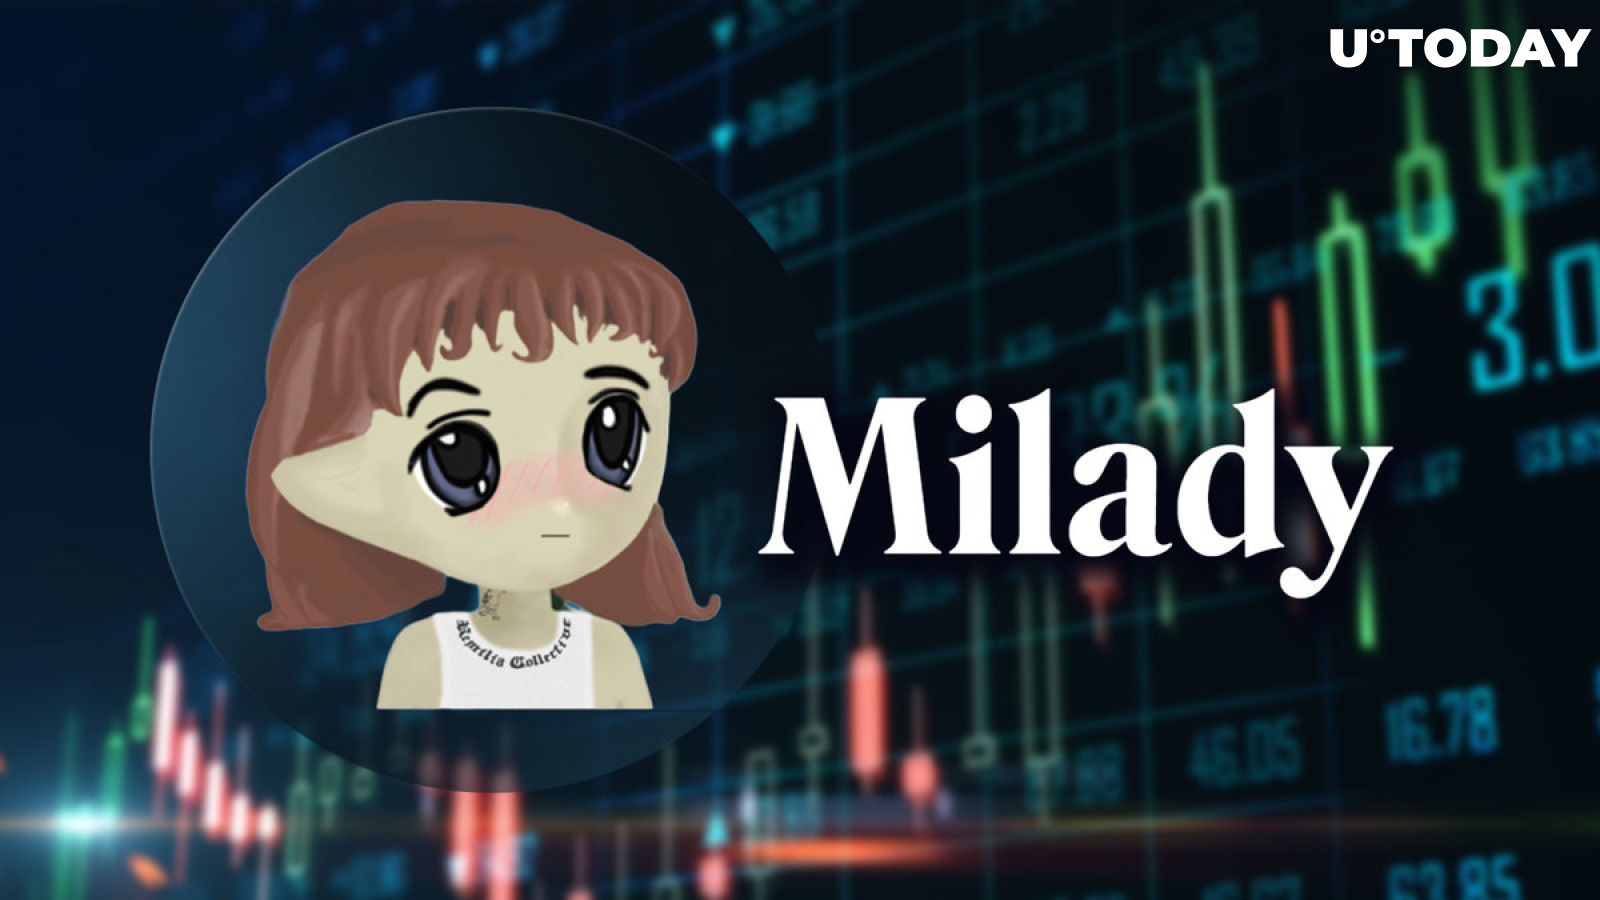 Milady Meme Coin (LADYS) Taps Major Exchange Listing and Sees Massive Sell-off